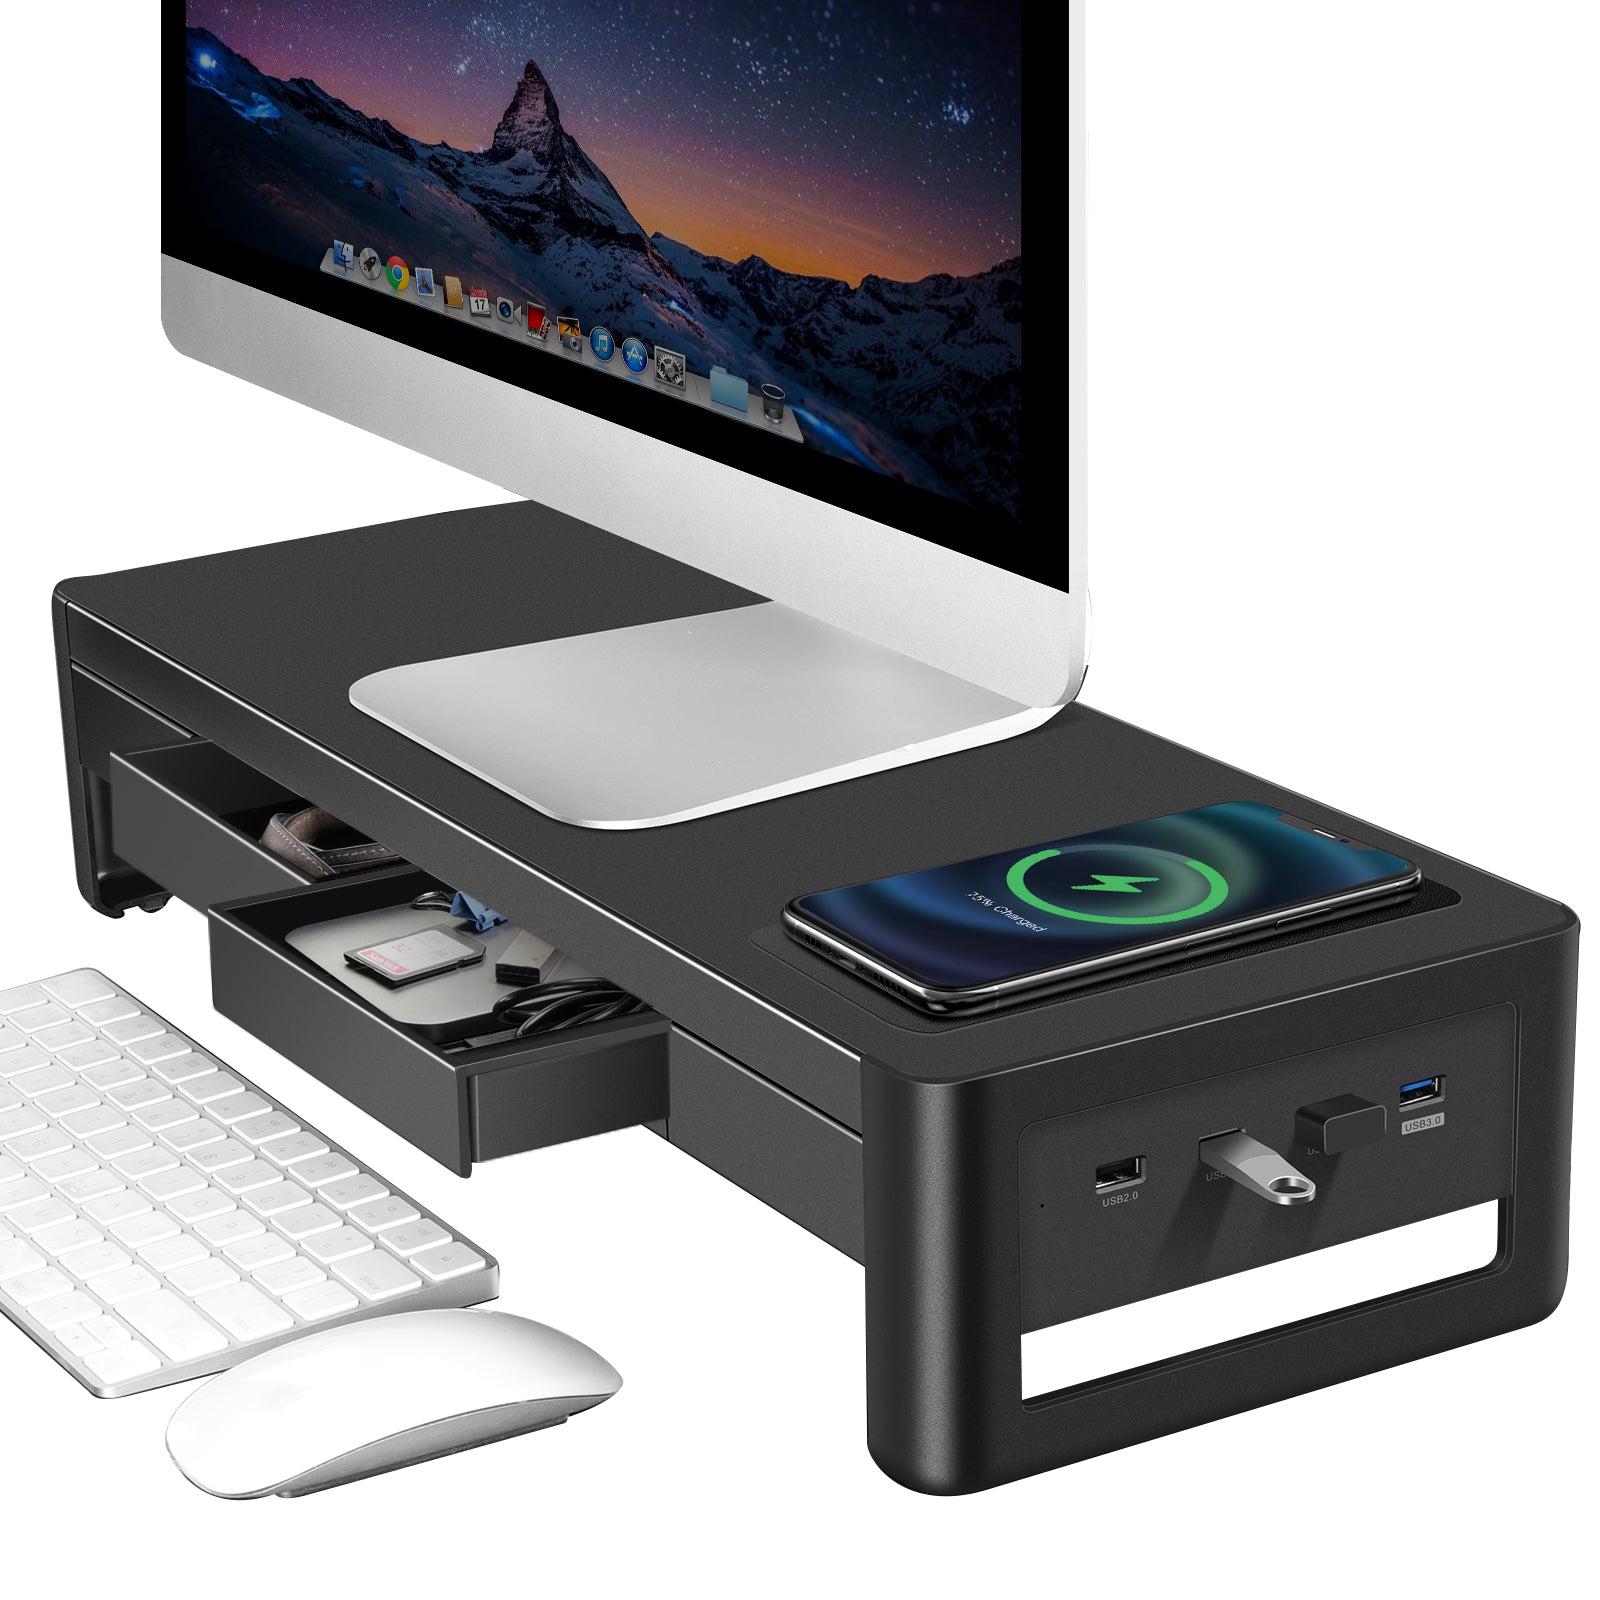 Vaydeer Releases Laptop Stand with Wireless Charger and USB ports for Home and Office Use